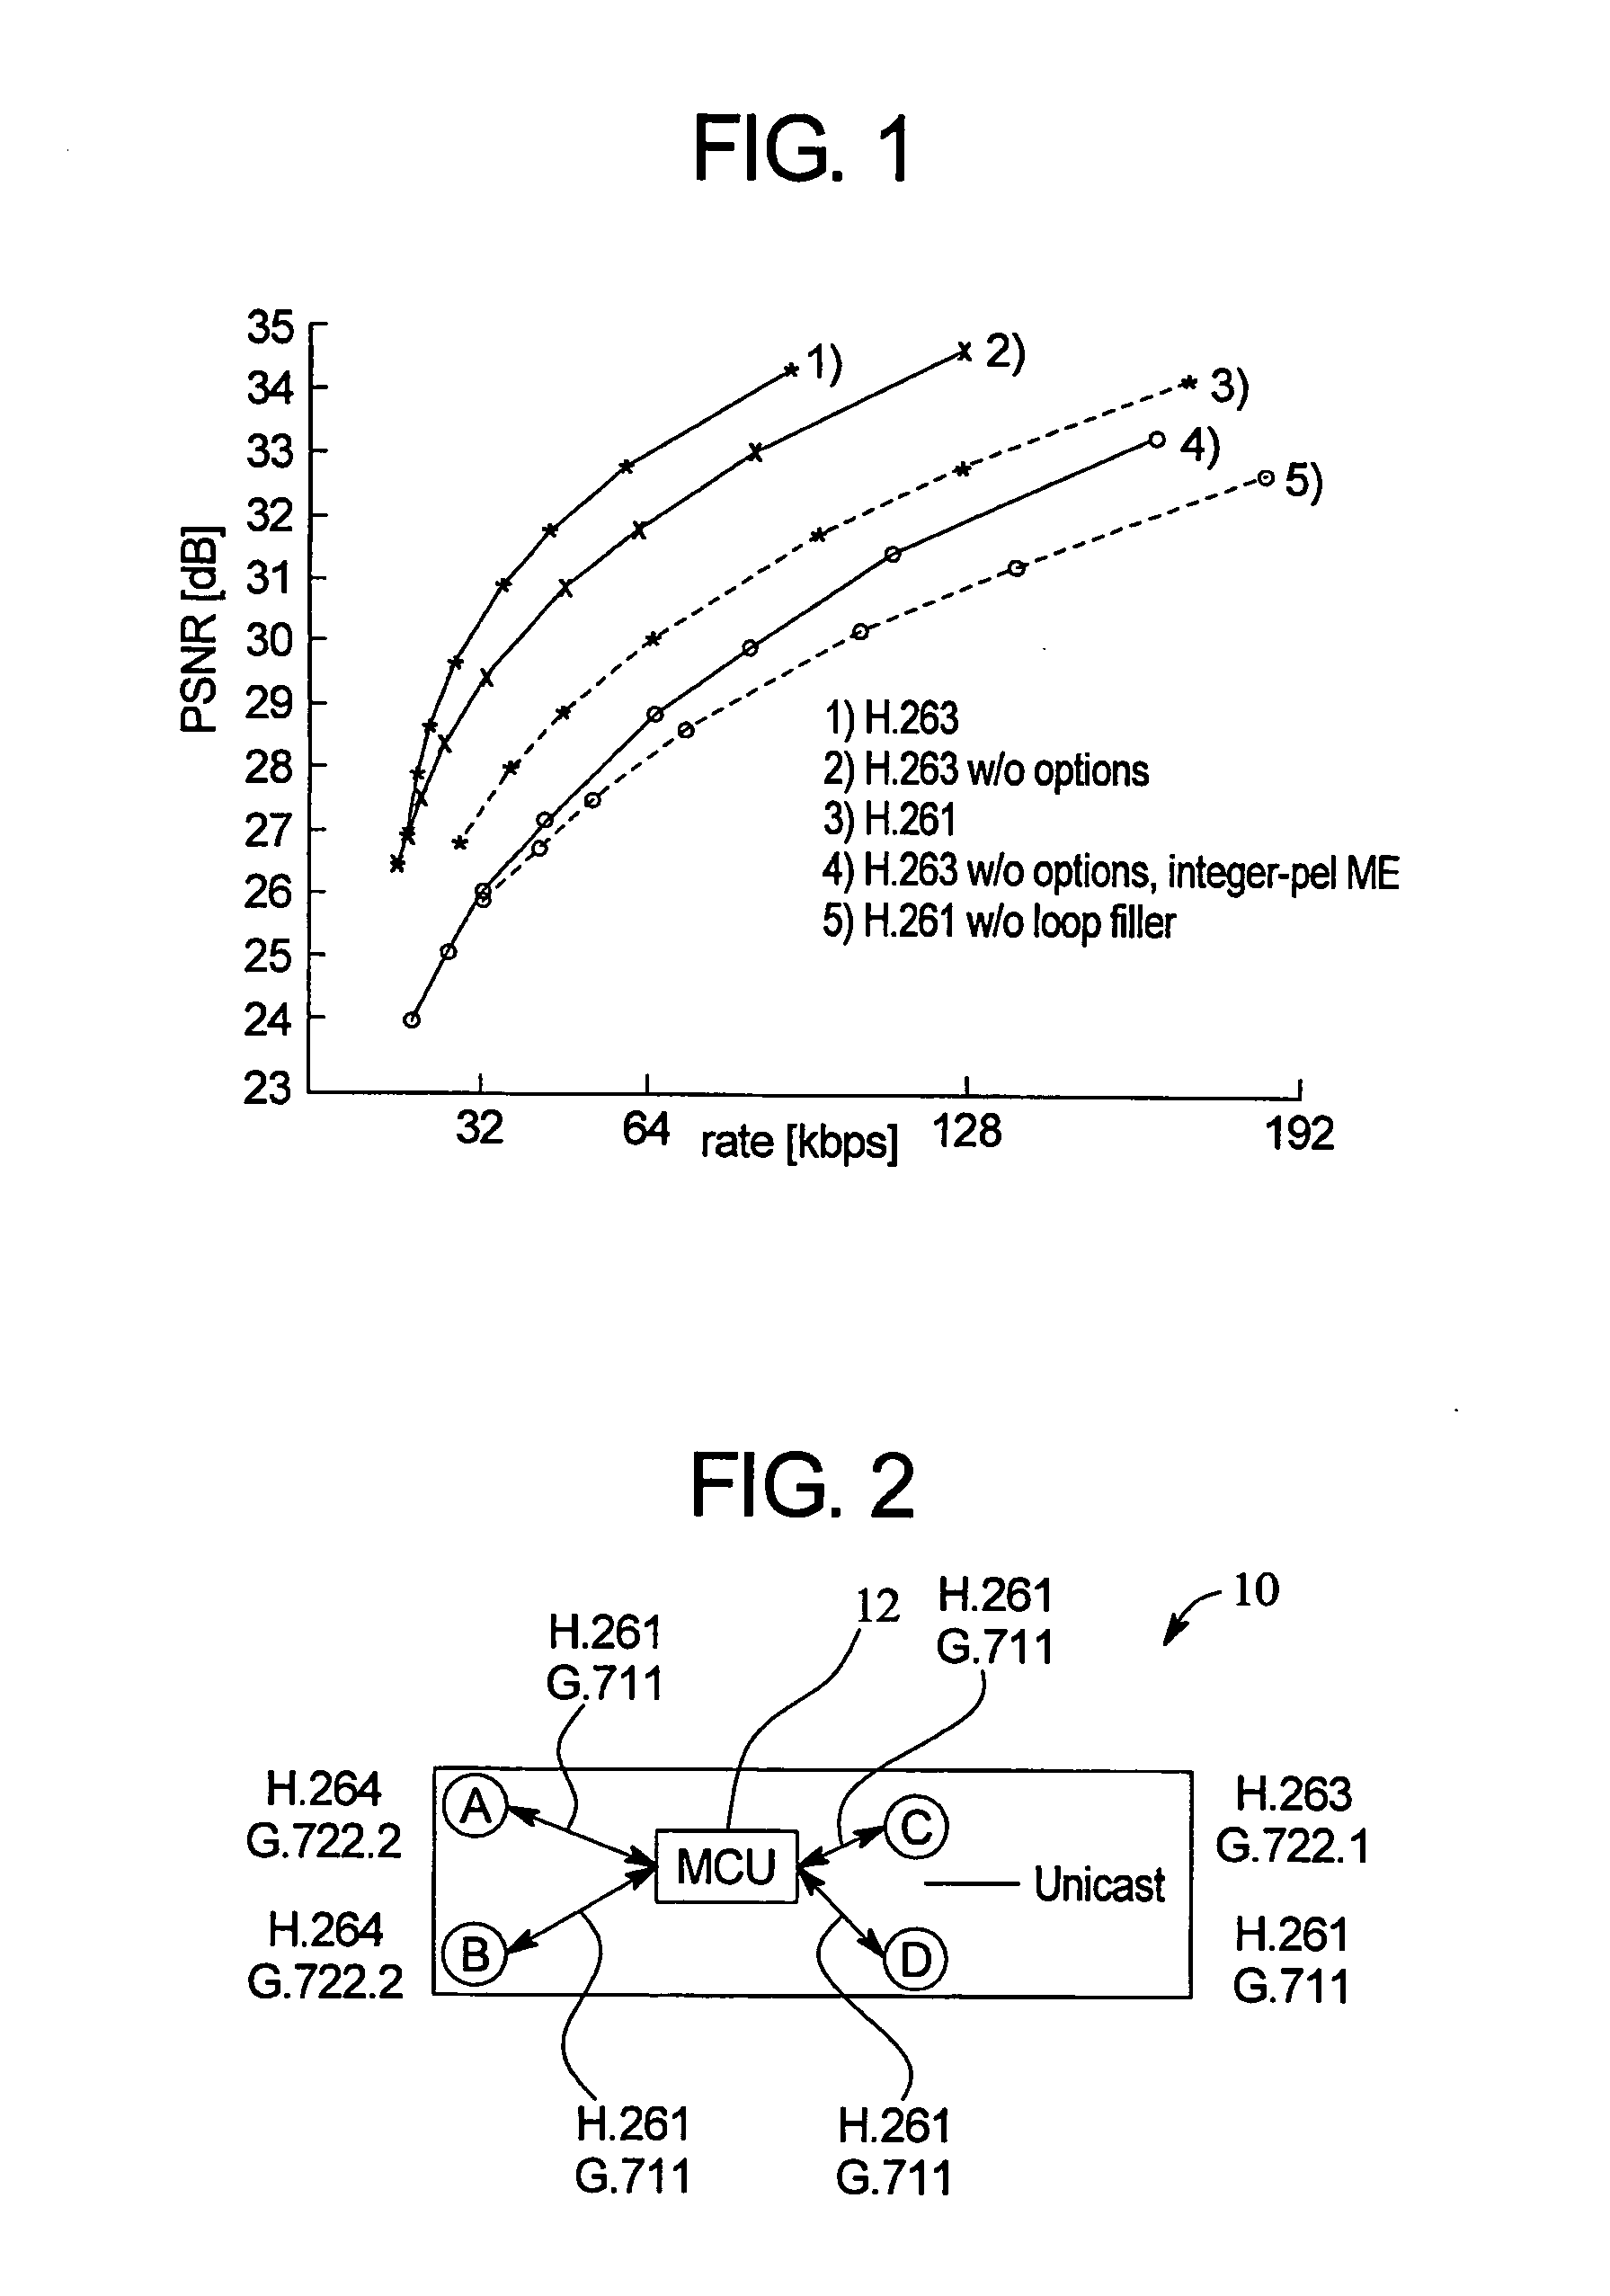 System and method for high quality video conferencing with heterogeneous end-points and networks